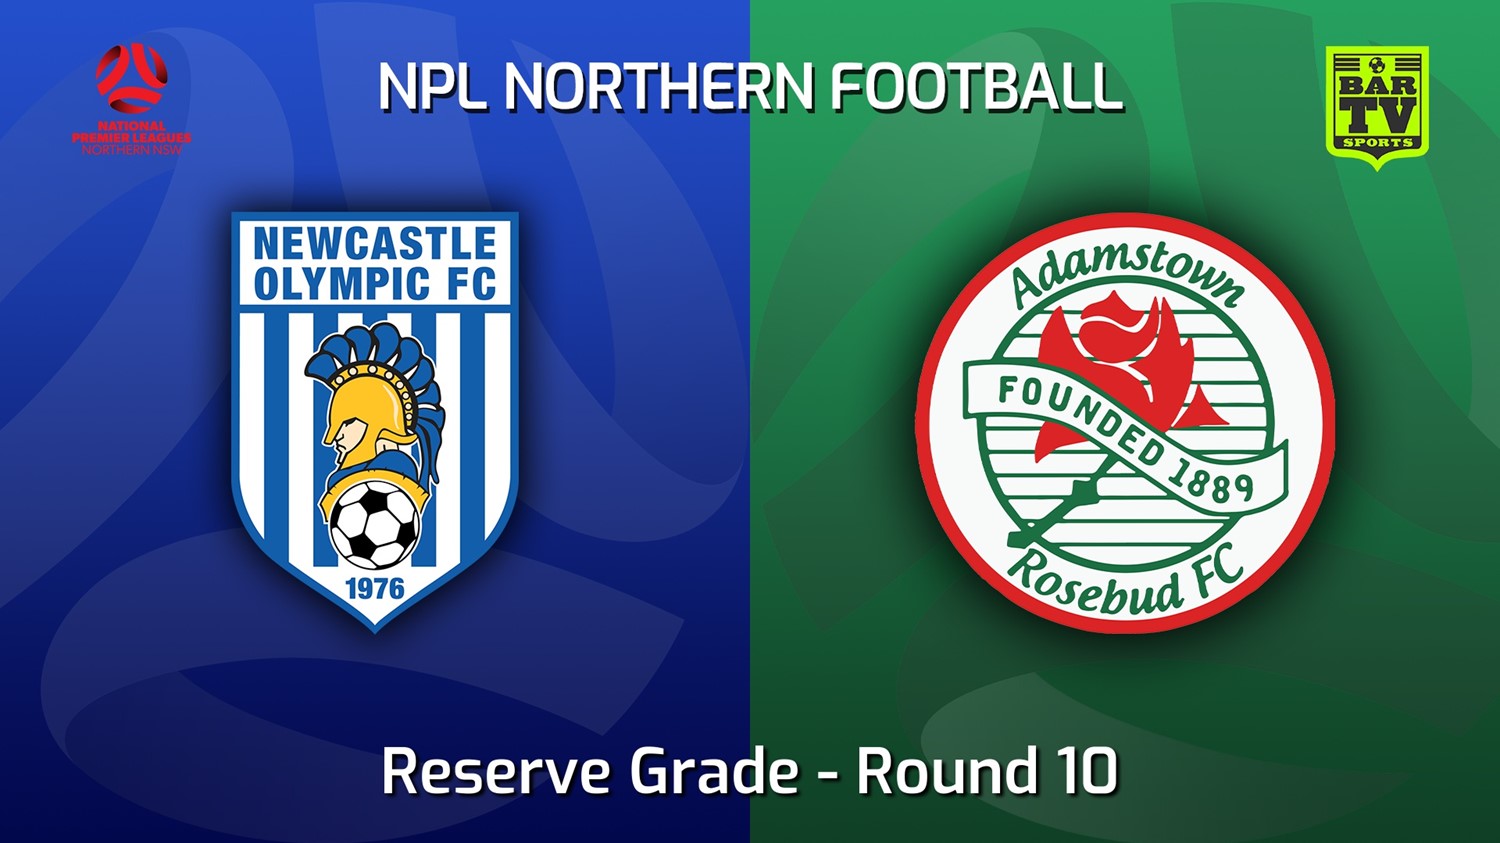 220515-NNSW NPLM Res Round 10 - Newcastle Olympic Res v Adamstown Rosebud FC Res Minigame Slate Image